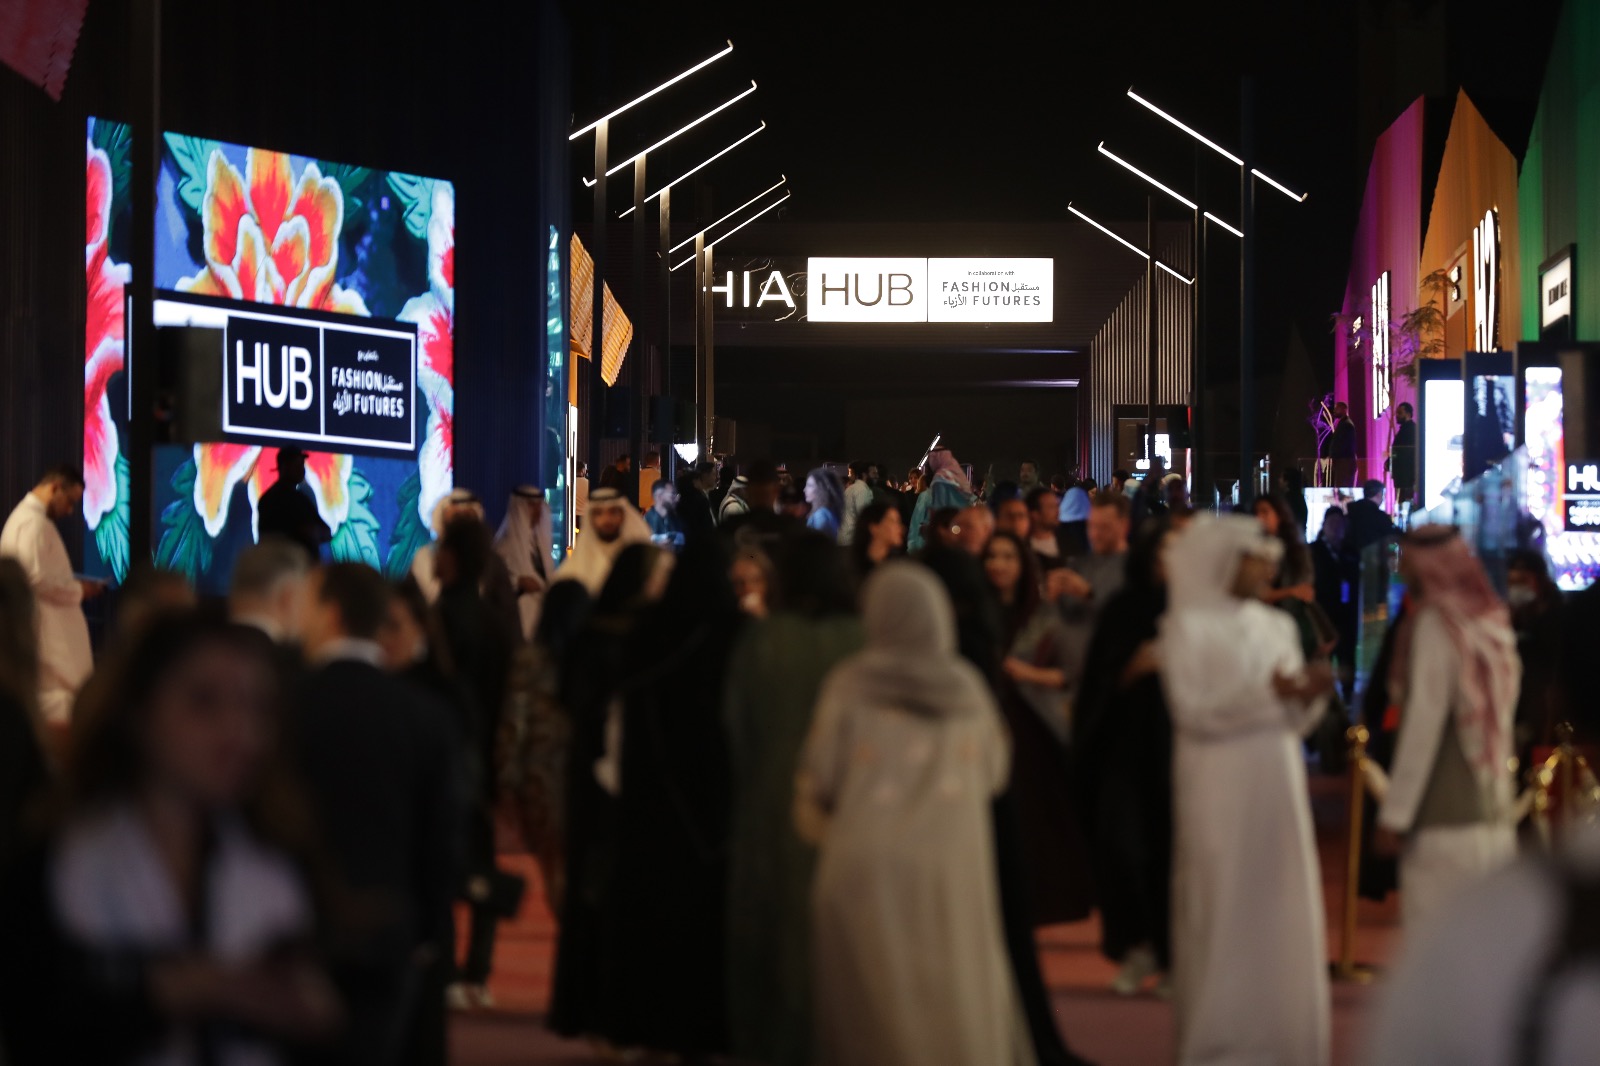 Hia Hub, in Collaboration with Fashion Futures, Successfully Delivers the Region’s Largest Fashion and Lifestyle Conference Featuring Industry Leading Names